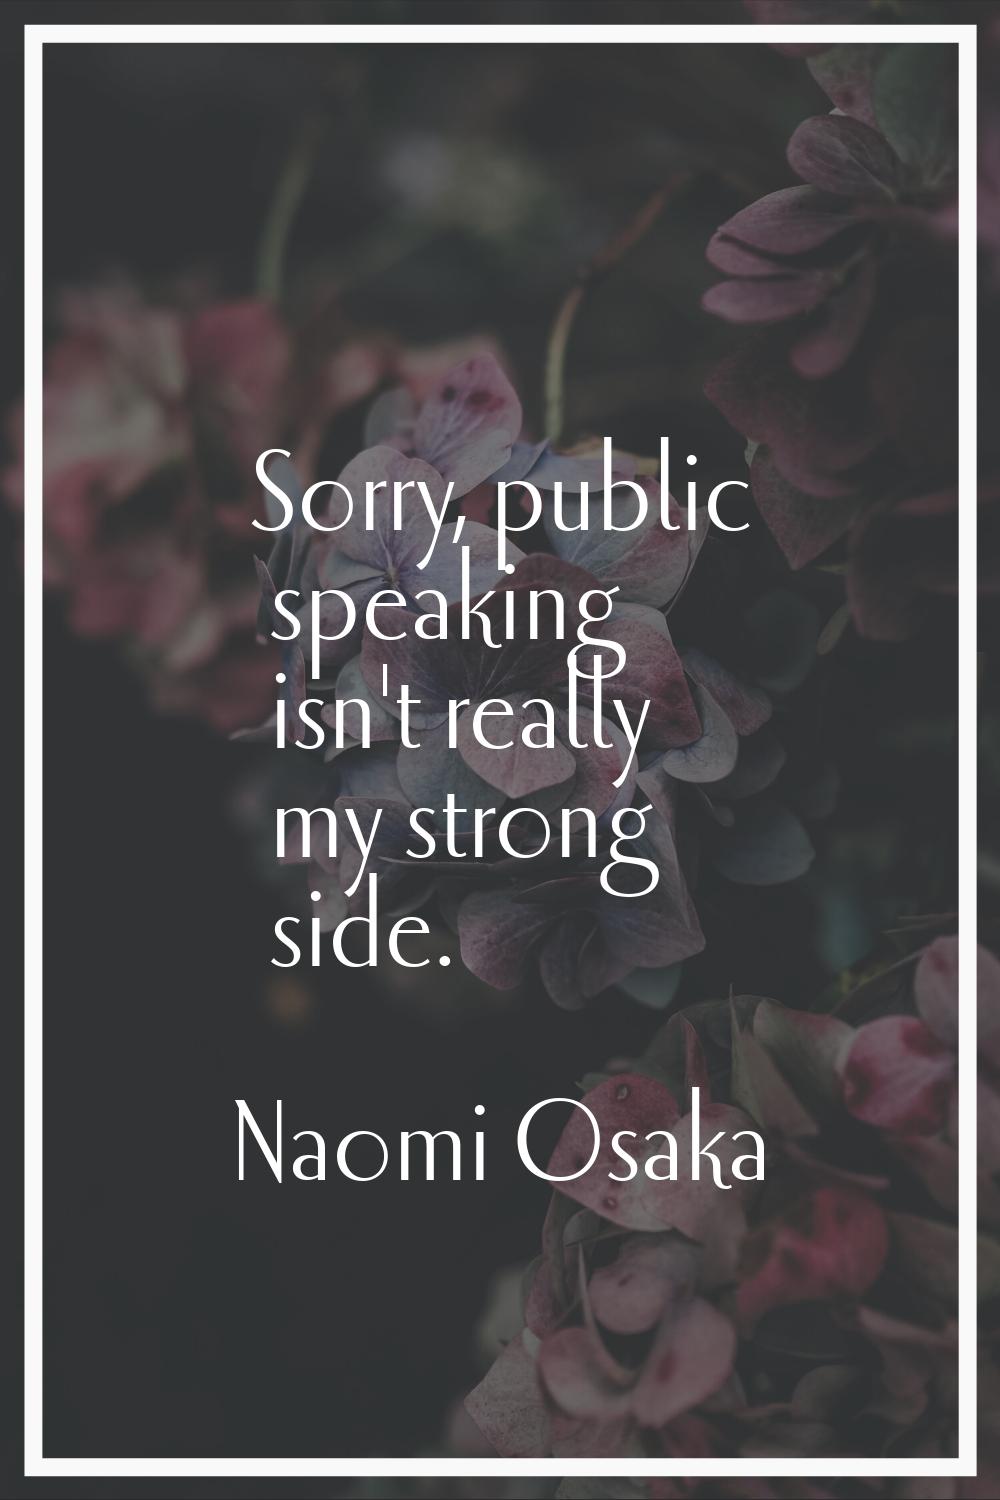 Sorry, public speaking isn't really my strong side.